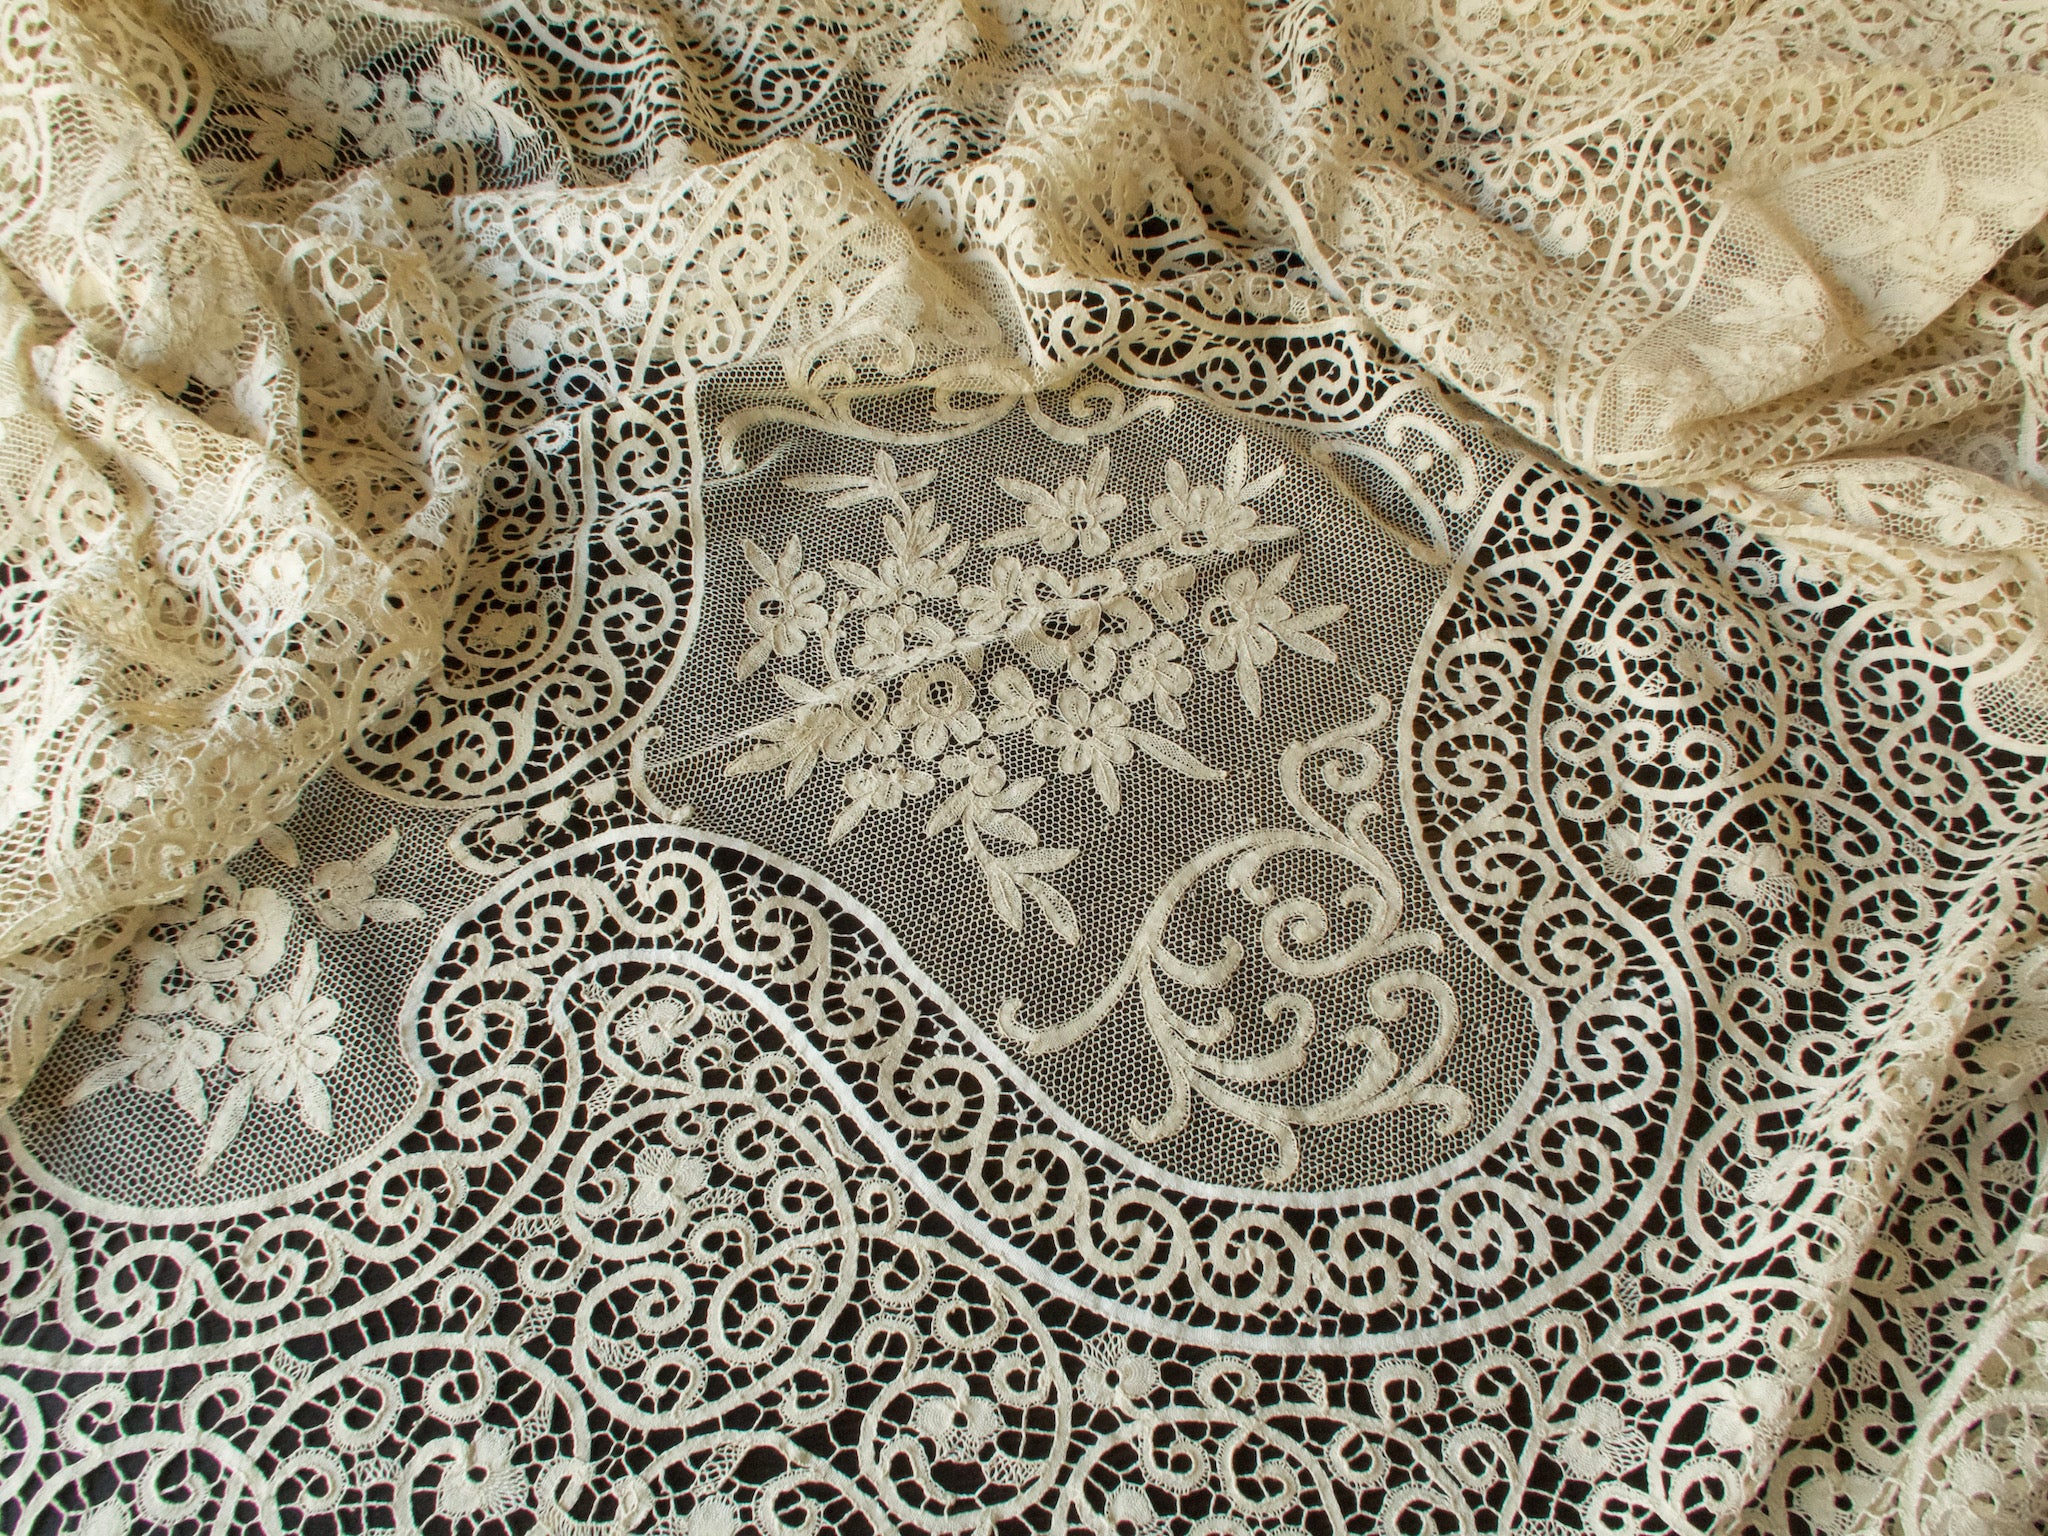 Stunning XL Vintage Italian Cantu Lace Tablecloth 74x250 - Things